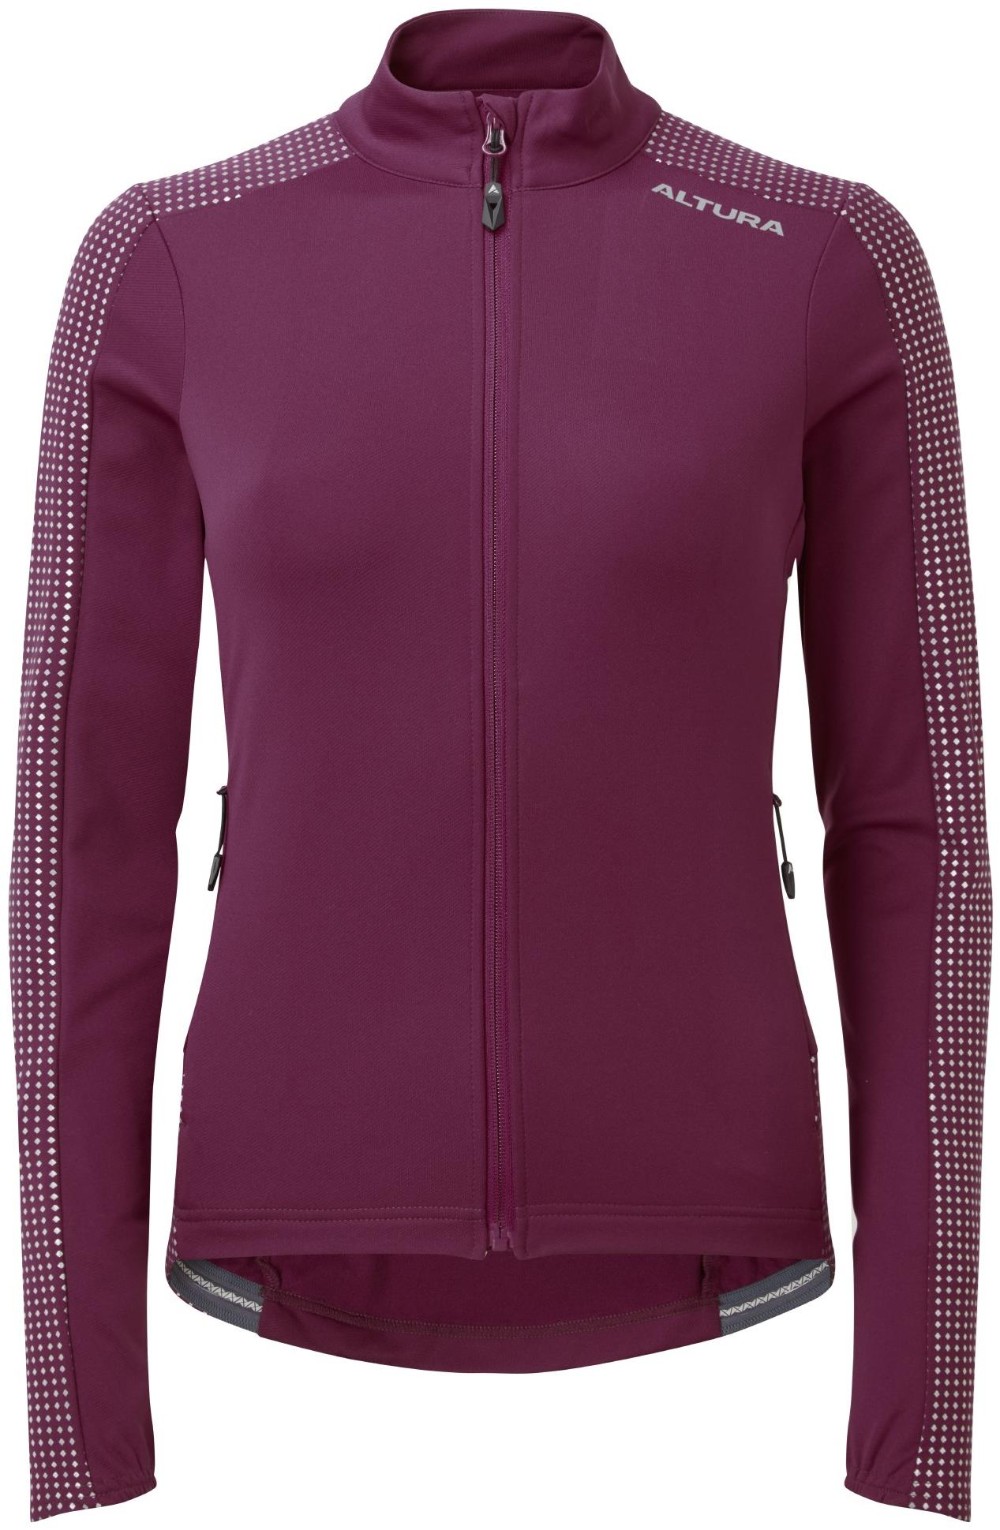 Nightvision Womens Long Sleeve Jersey image 0